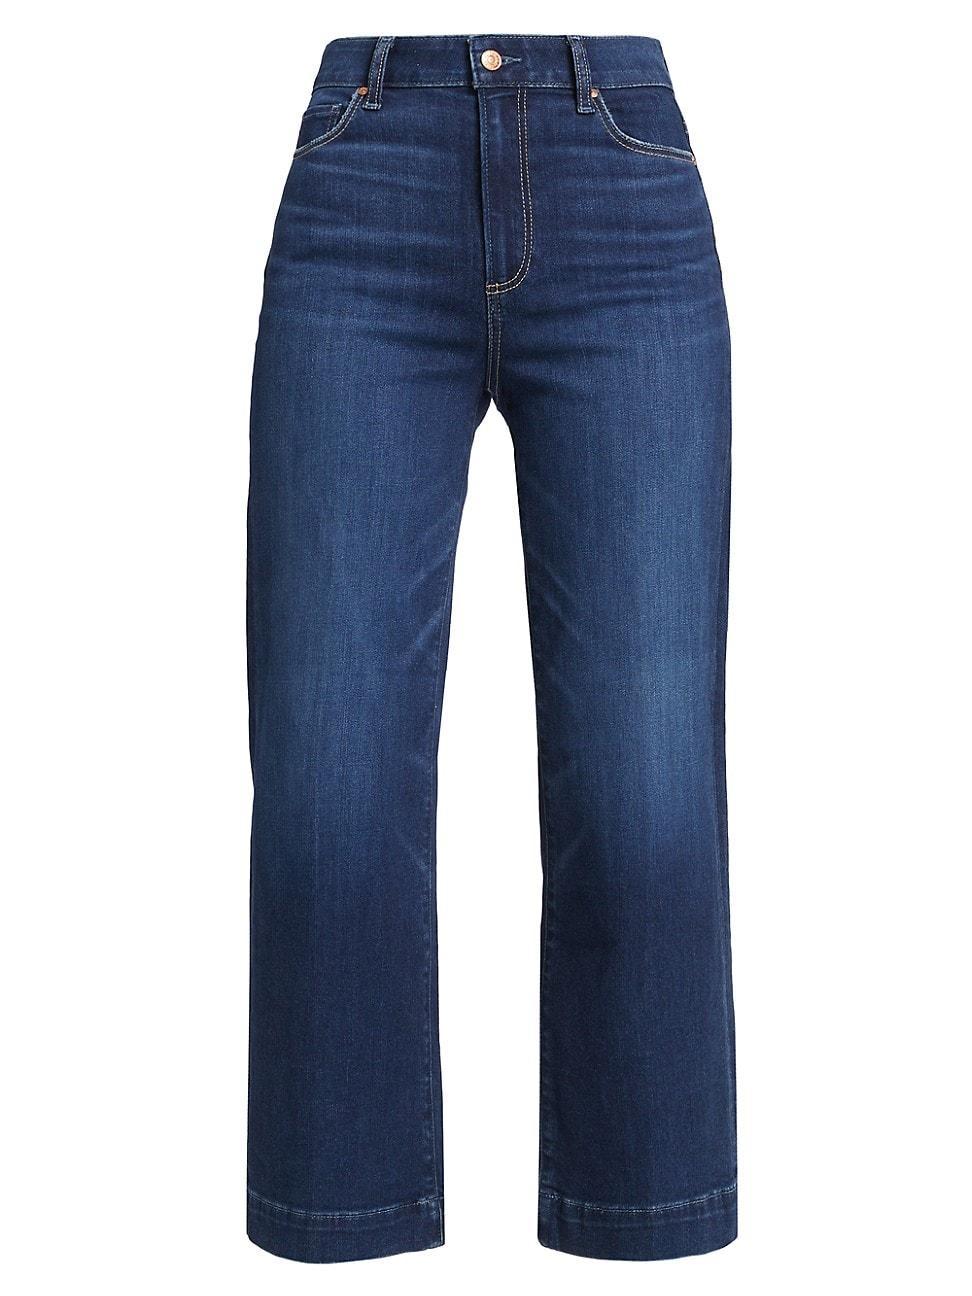 Womens Anessa Wide-Leg Ankle-Crop Jeans Product Image